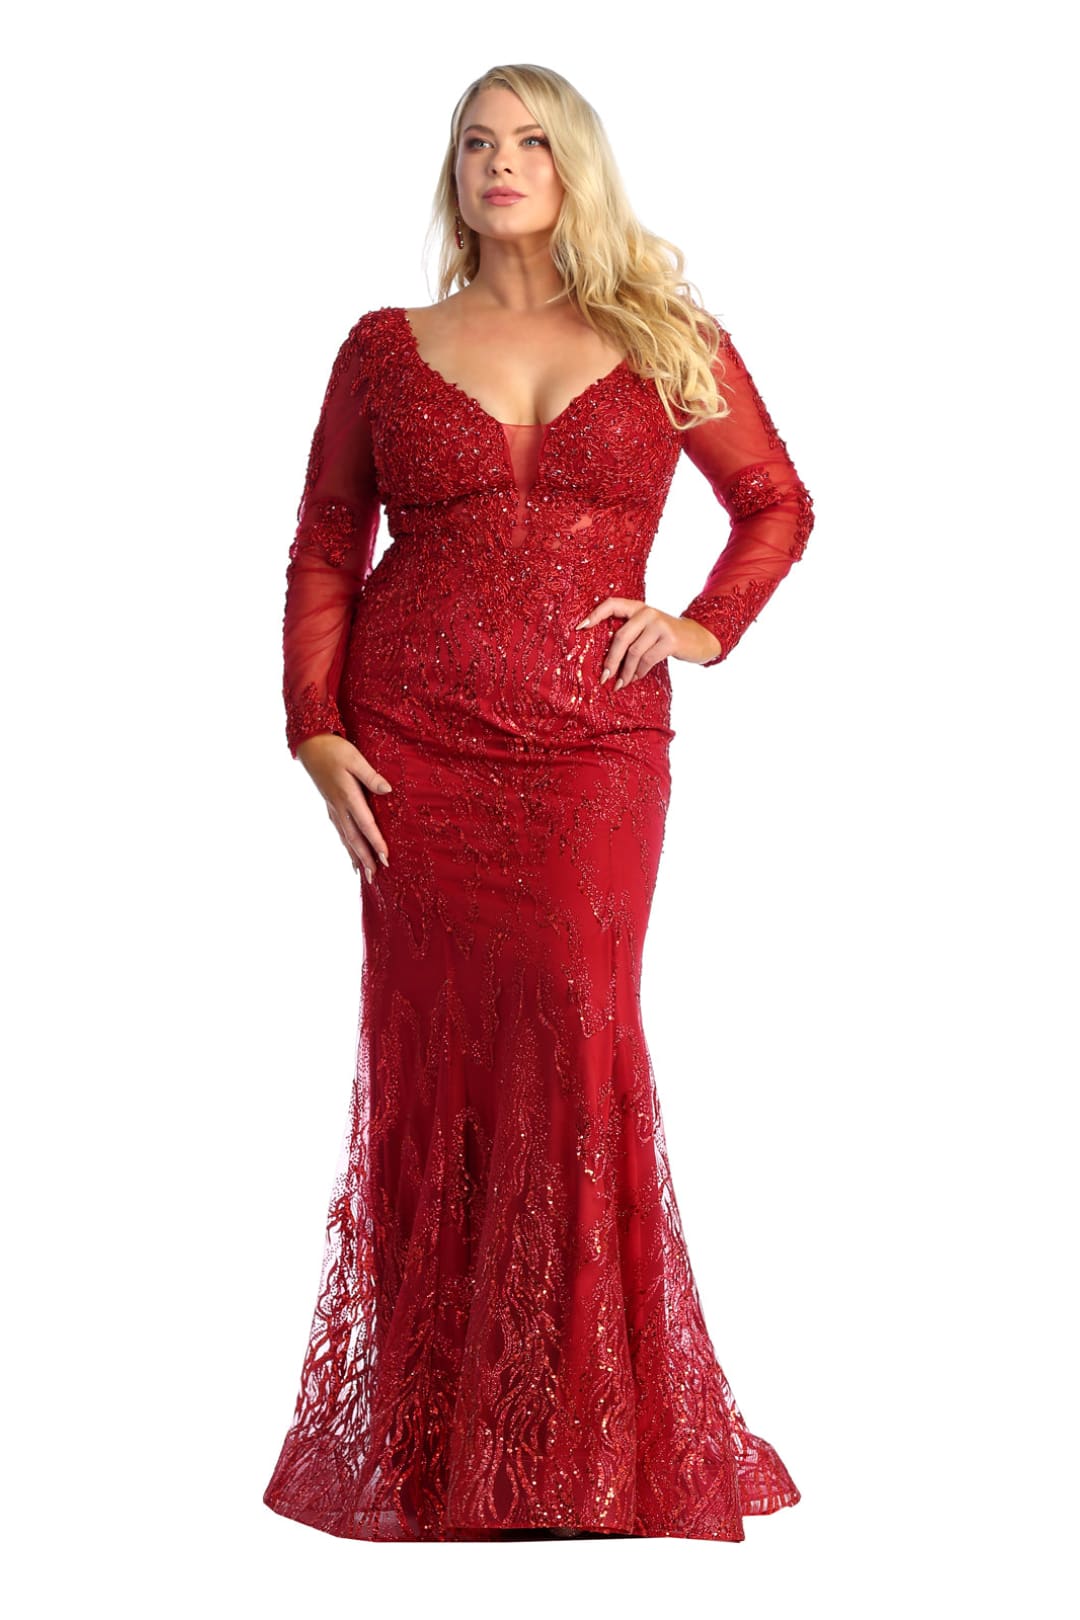 Plus Size formal Dresses & Gowns - BURGUNDY / S